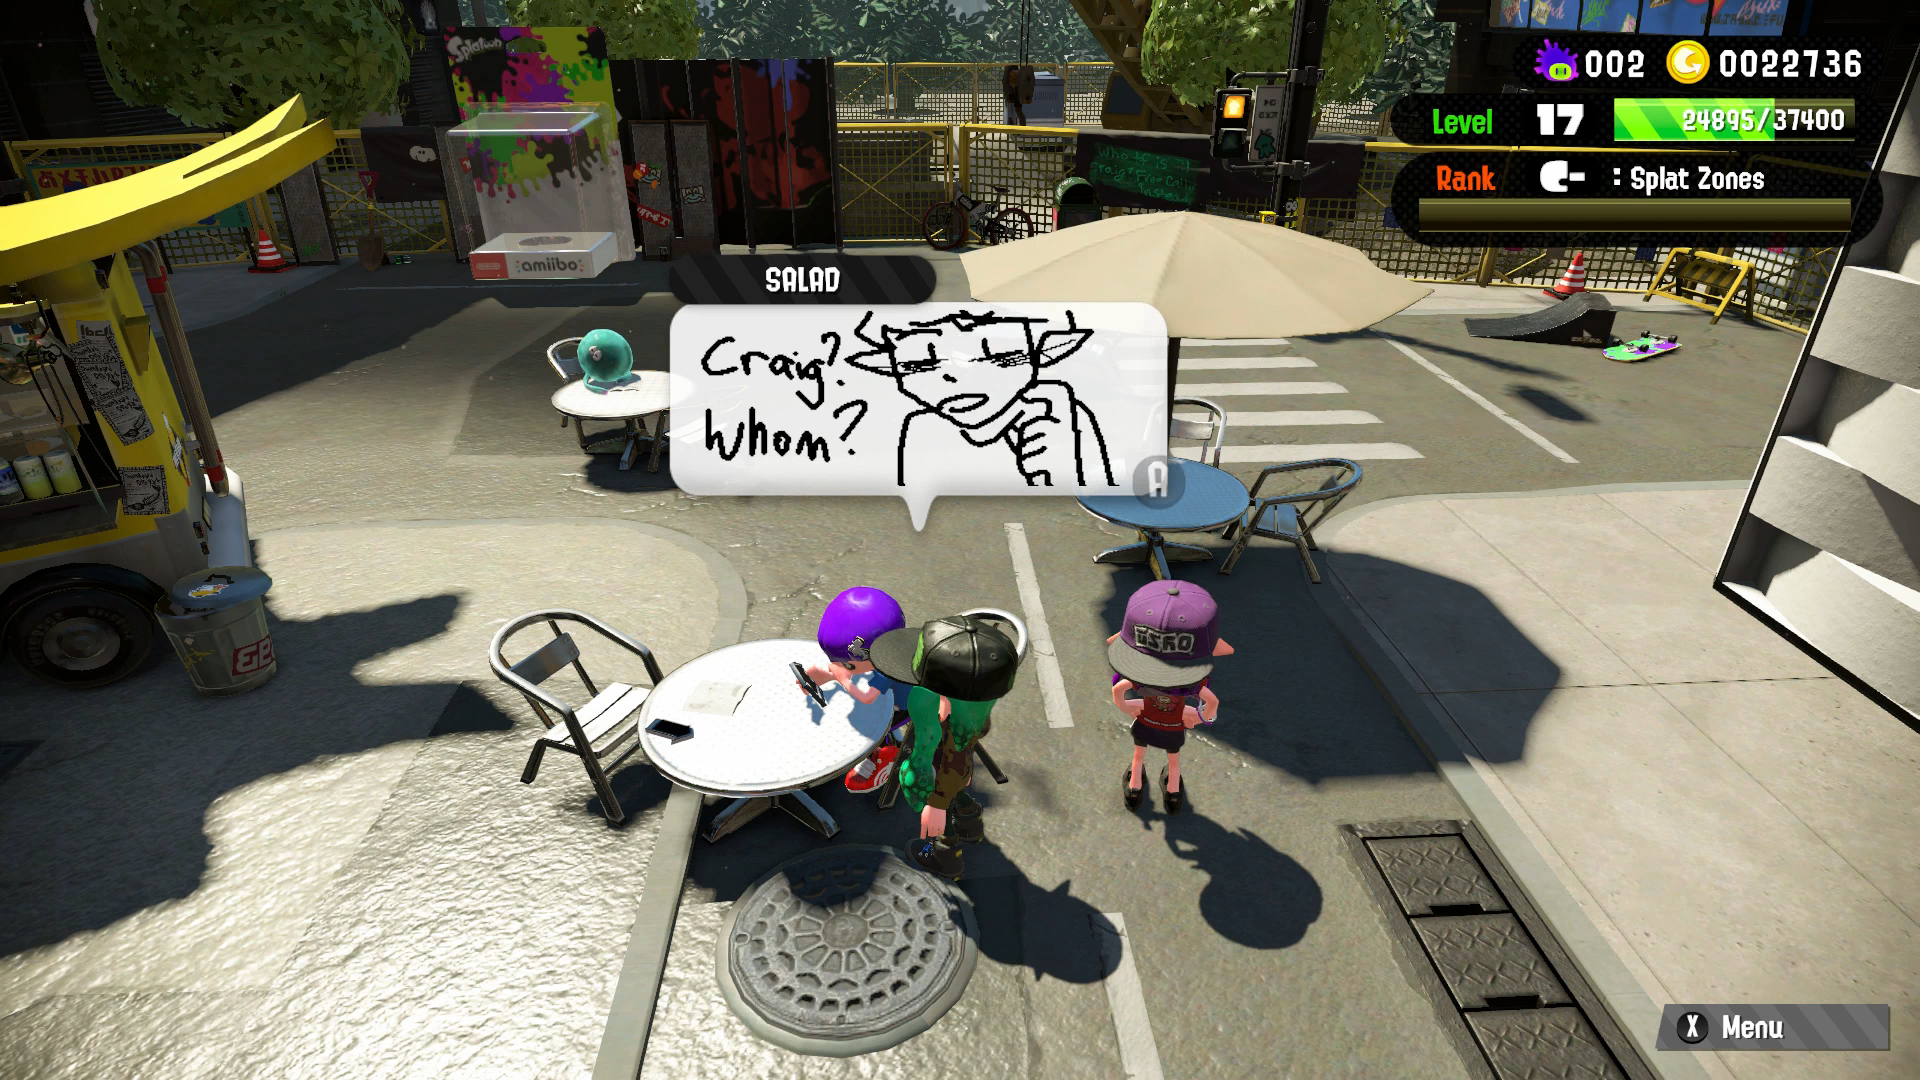 Splatoon 2’s Lobby Full Of Fans Rallying Behind Banned ‘Bike Cuck’ Player